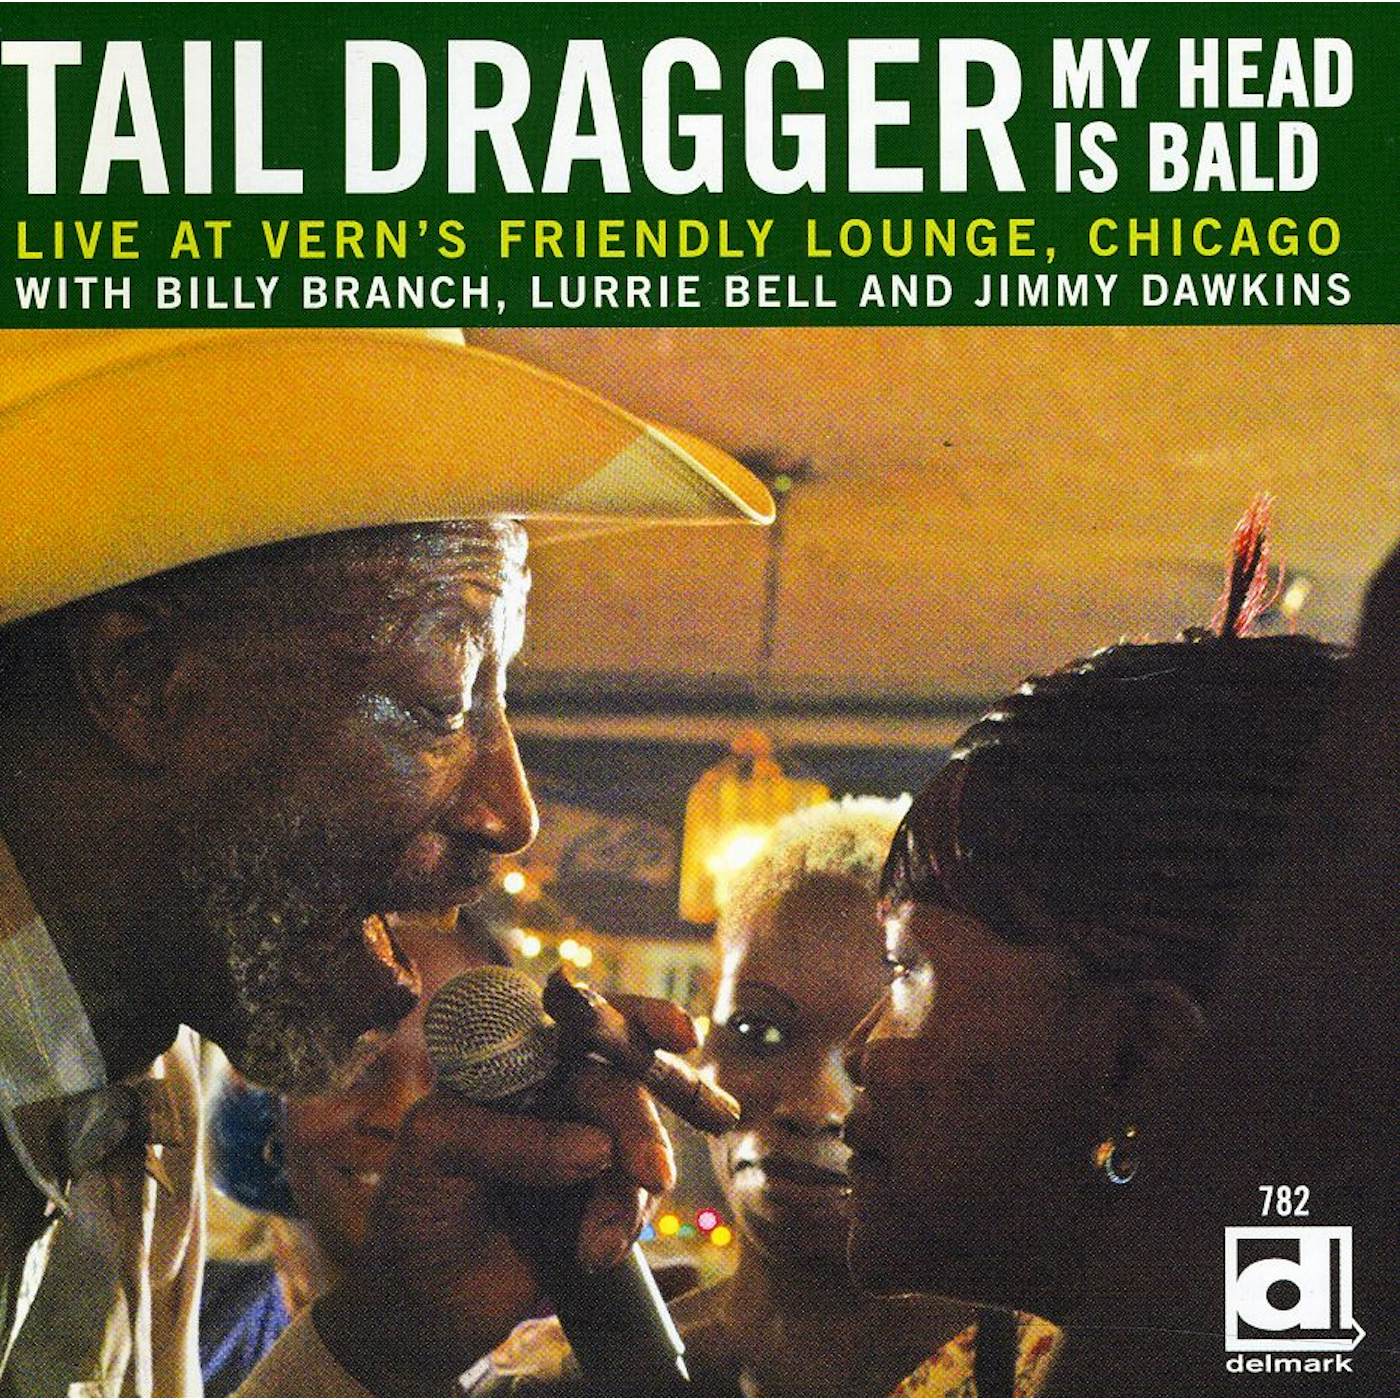 Tail Dragger MY HEAD IS BALD: LIVE AT VERN'S FRIENDLY LOUNGE CD